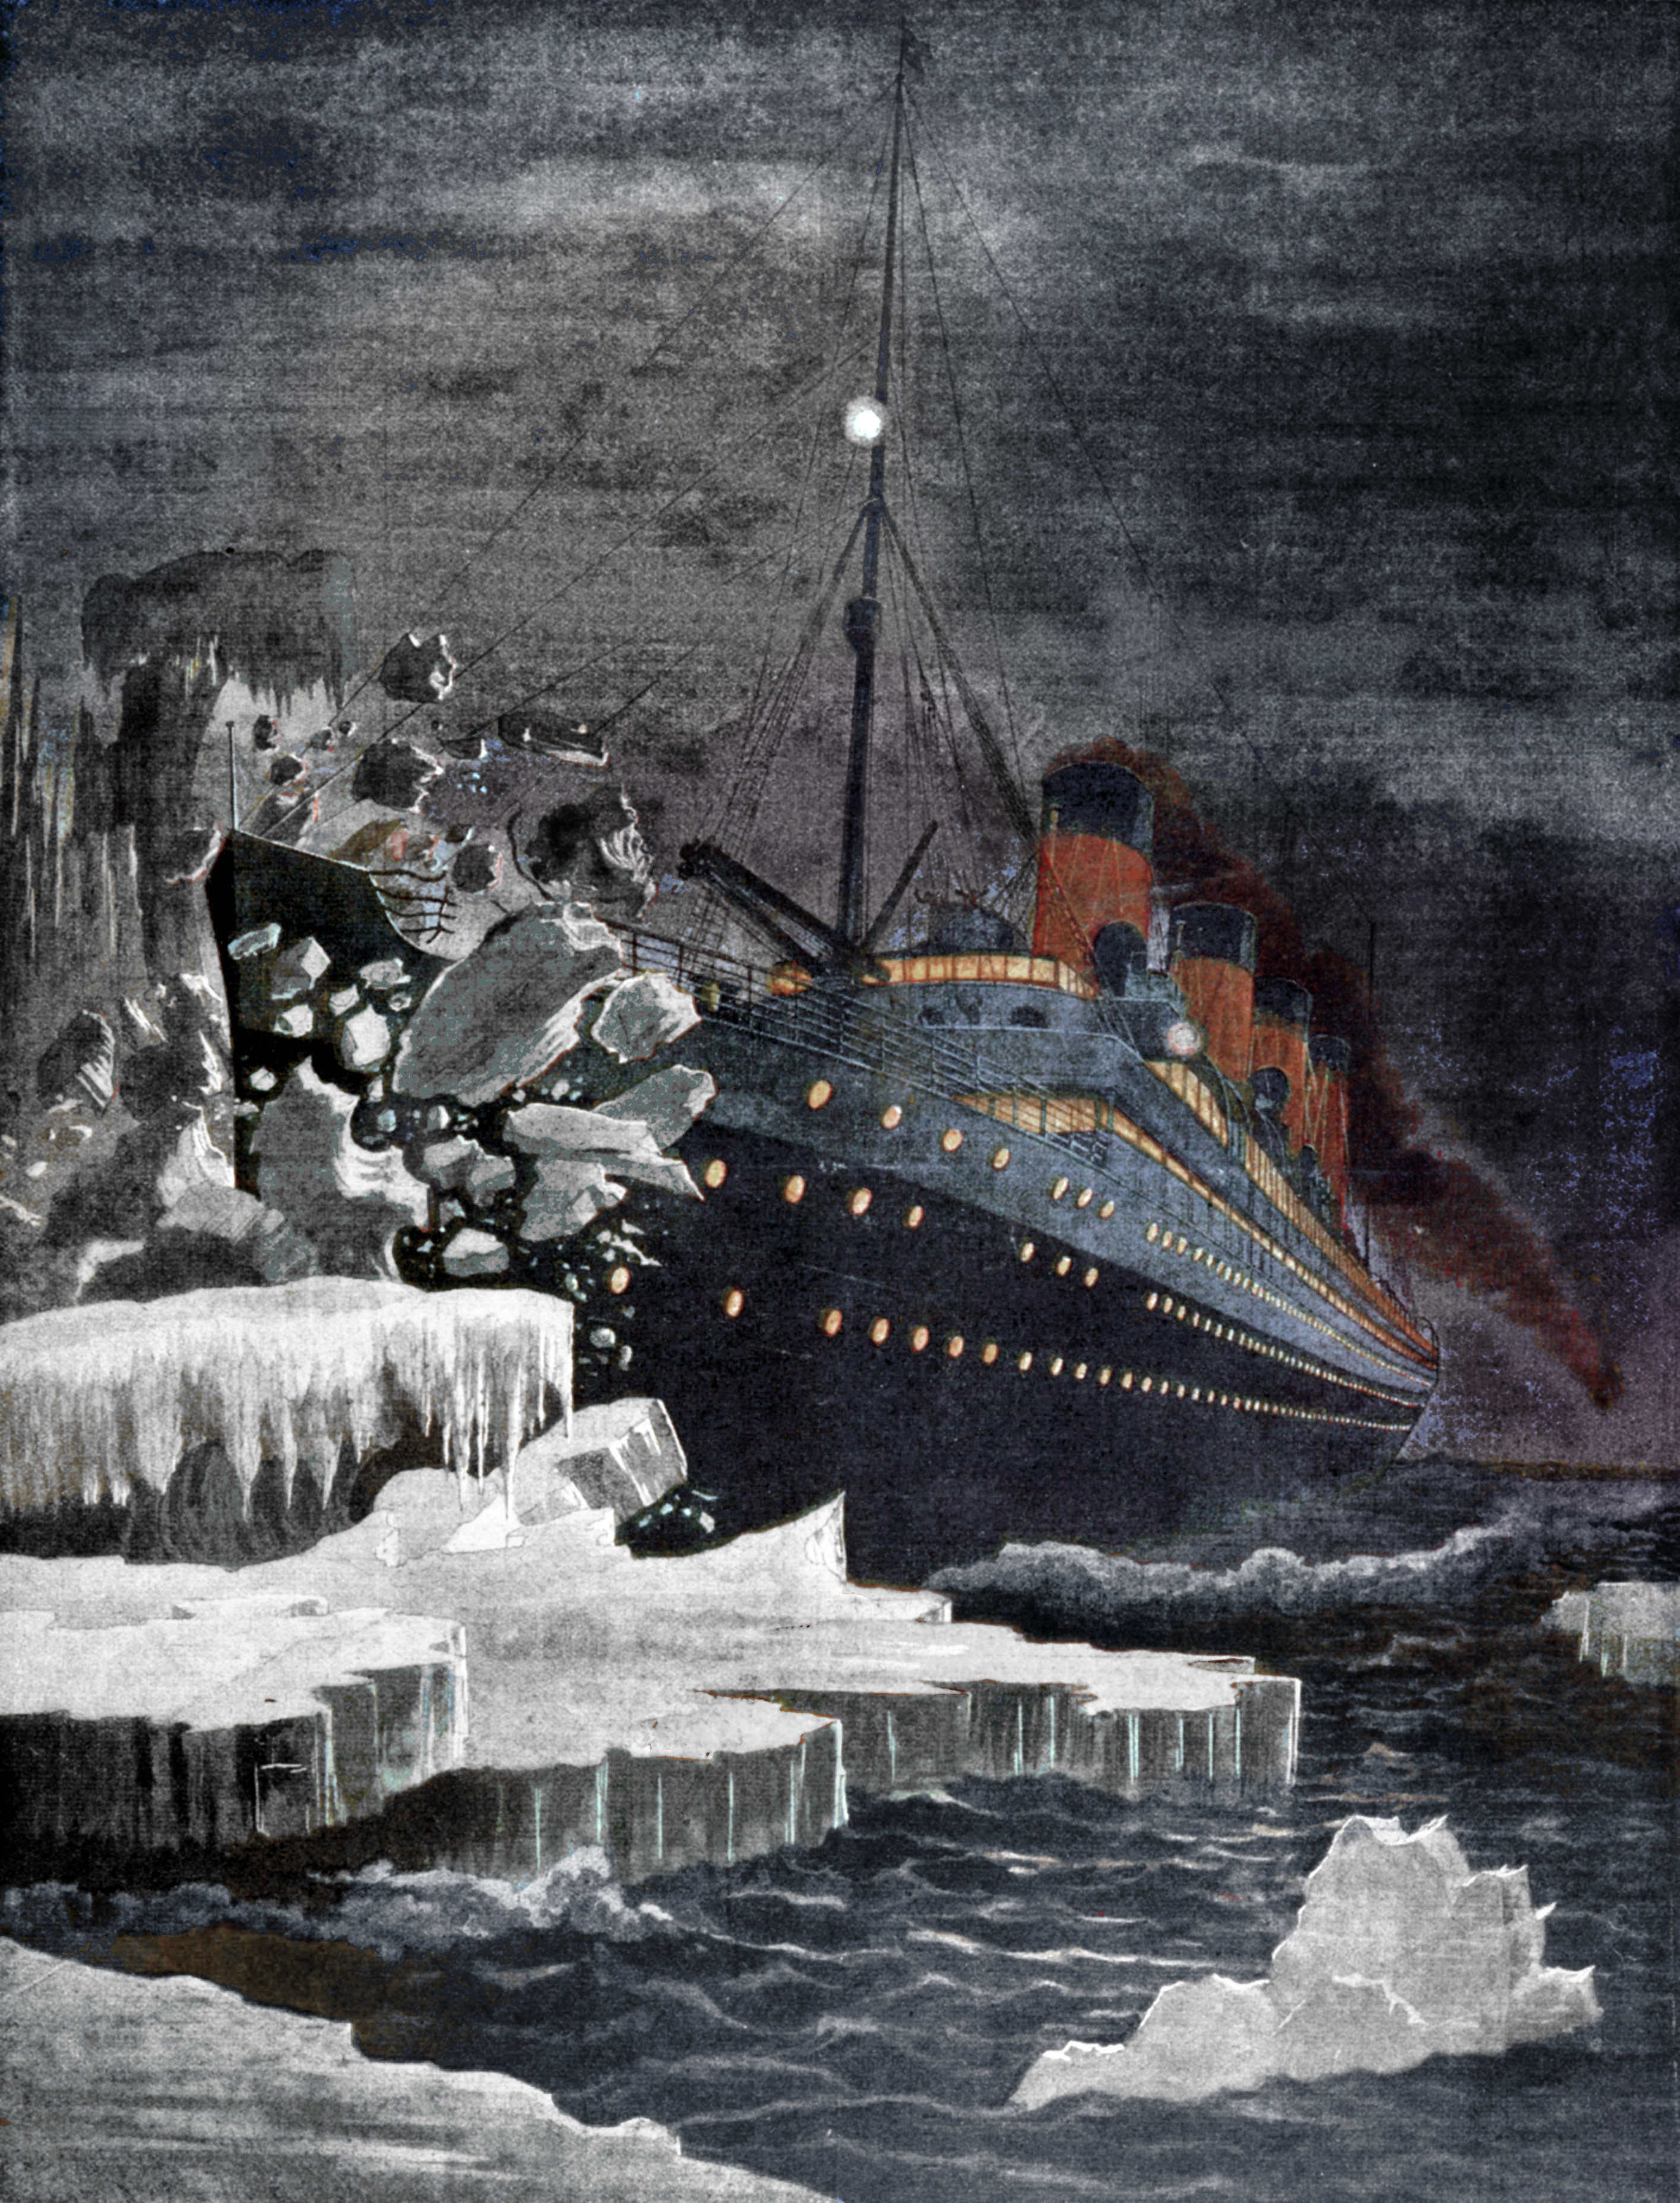 Maritime Disasters | HISTORY